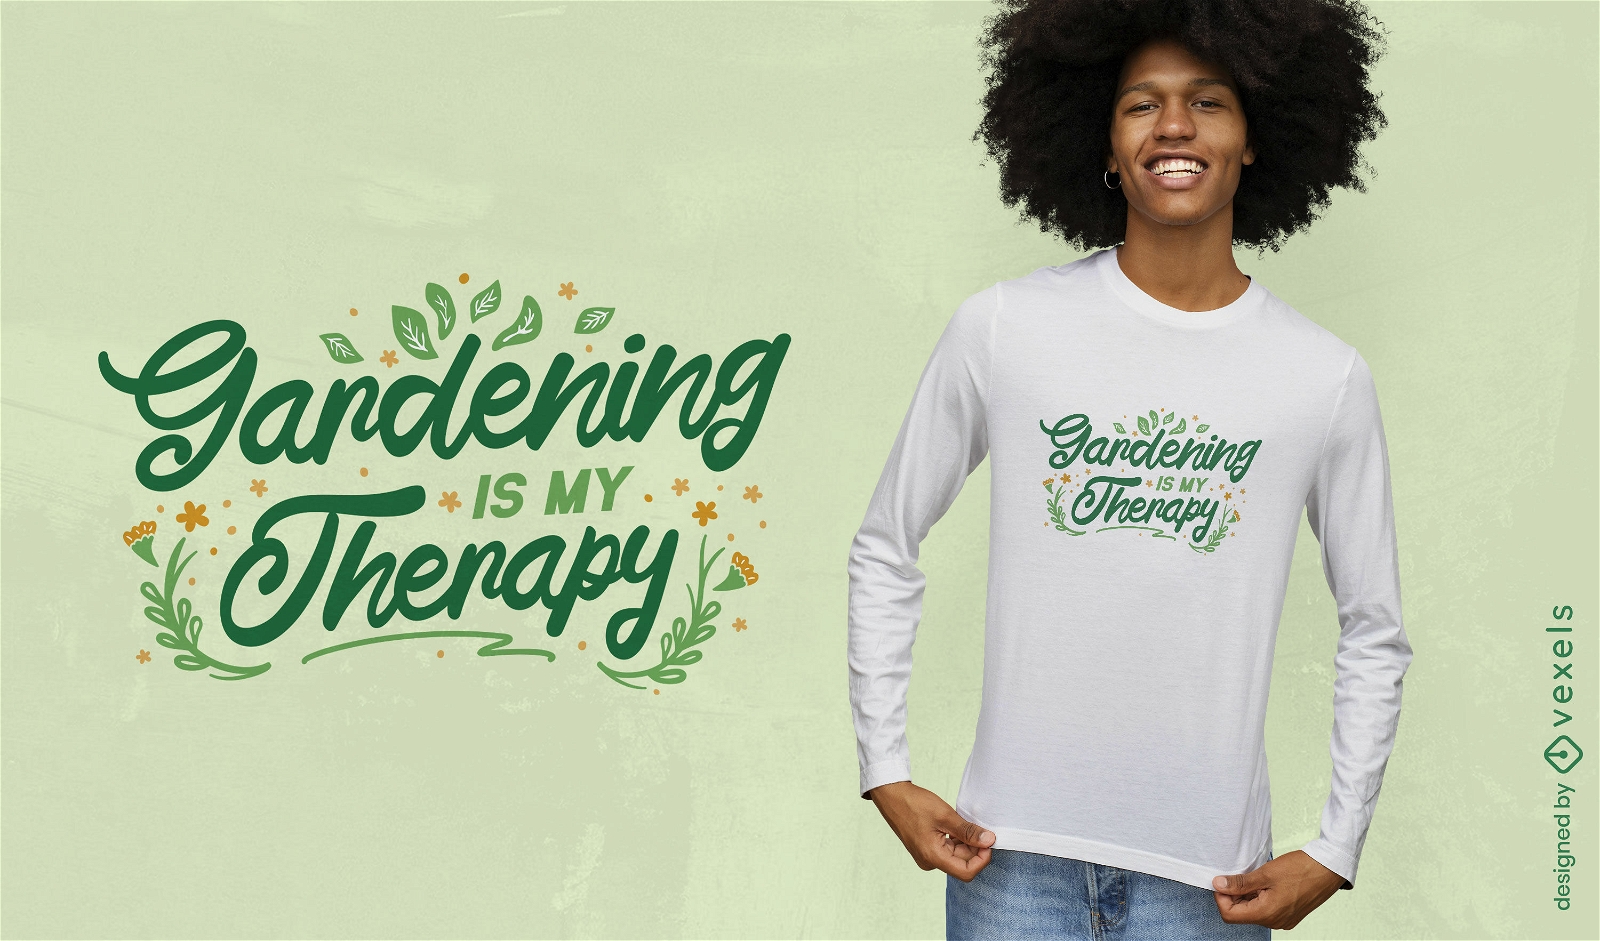 Gardening therapy quote t-shirt design